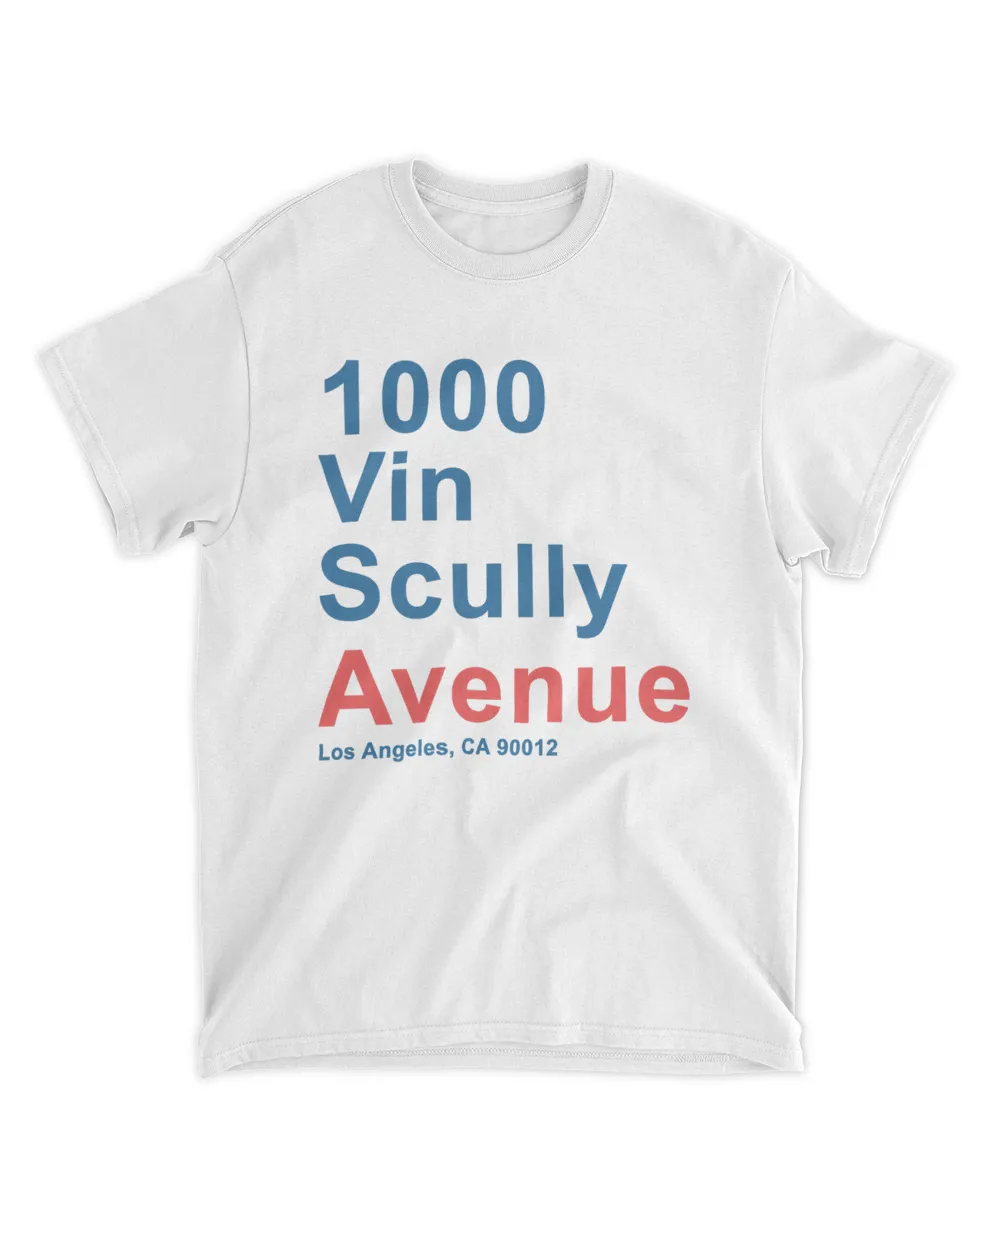 1000 Vin Scully Avenue Los Angeles CA 90012 T Shirt